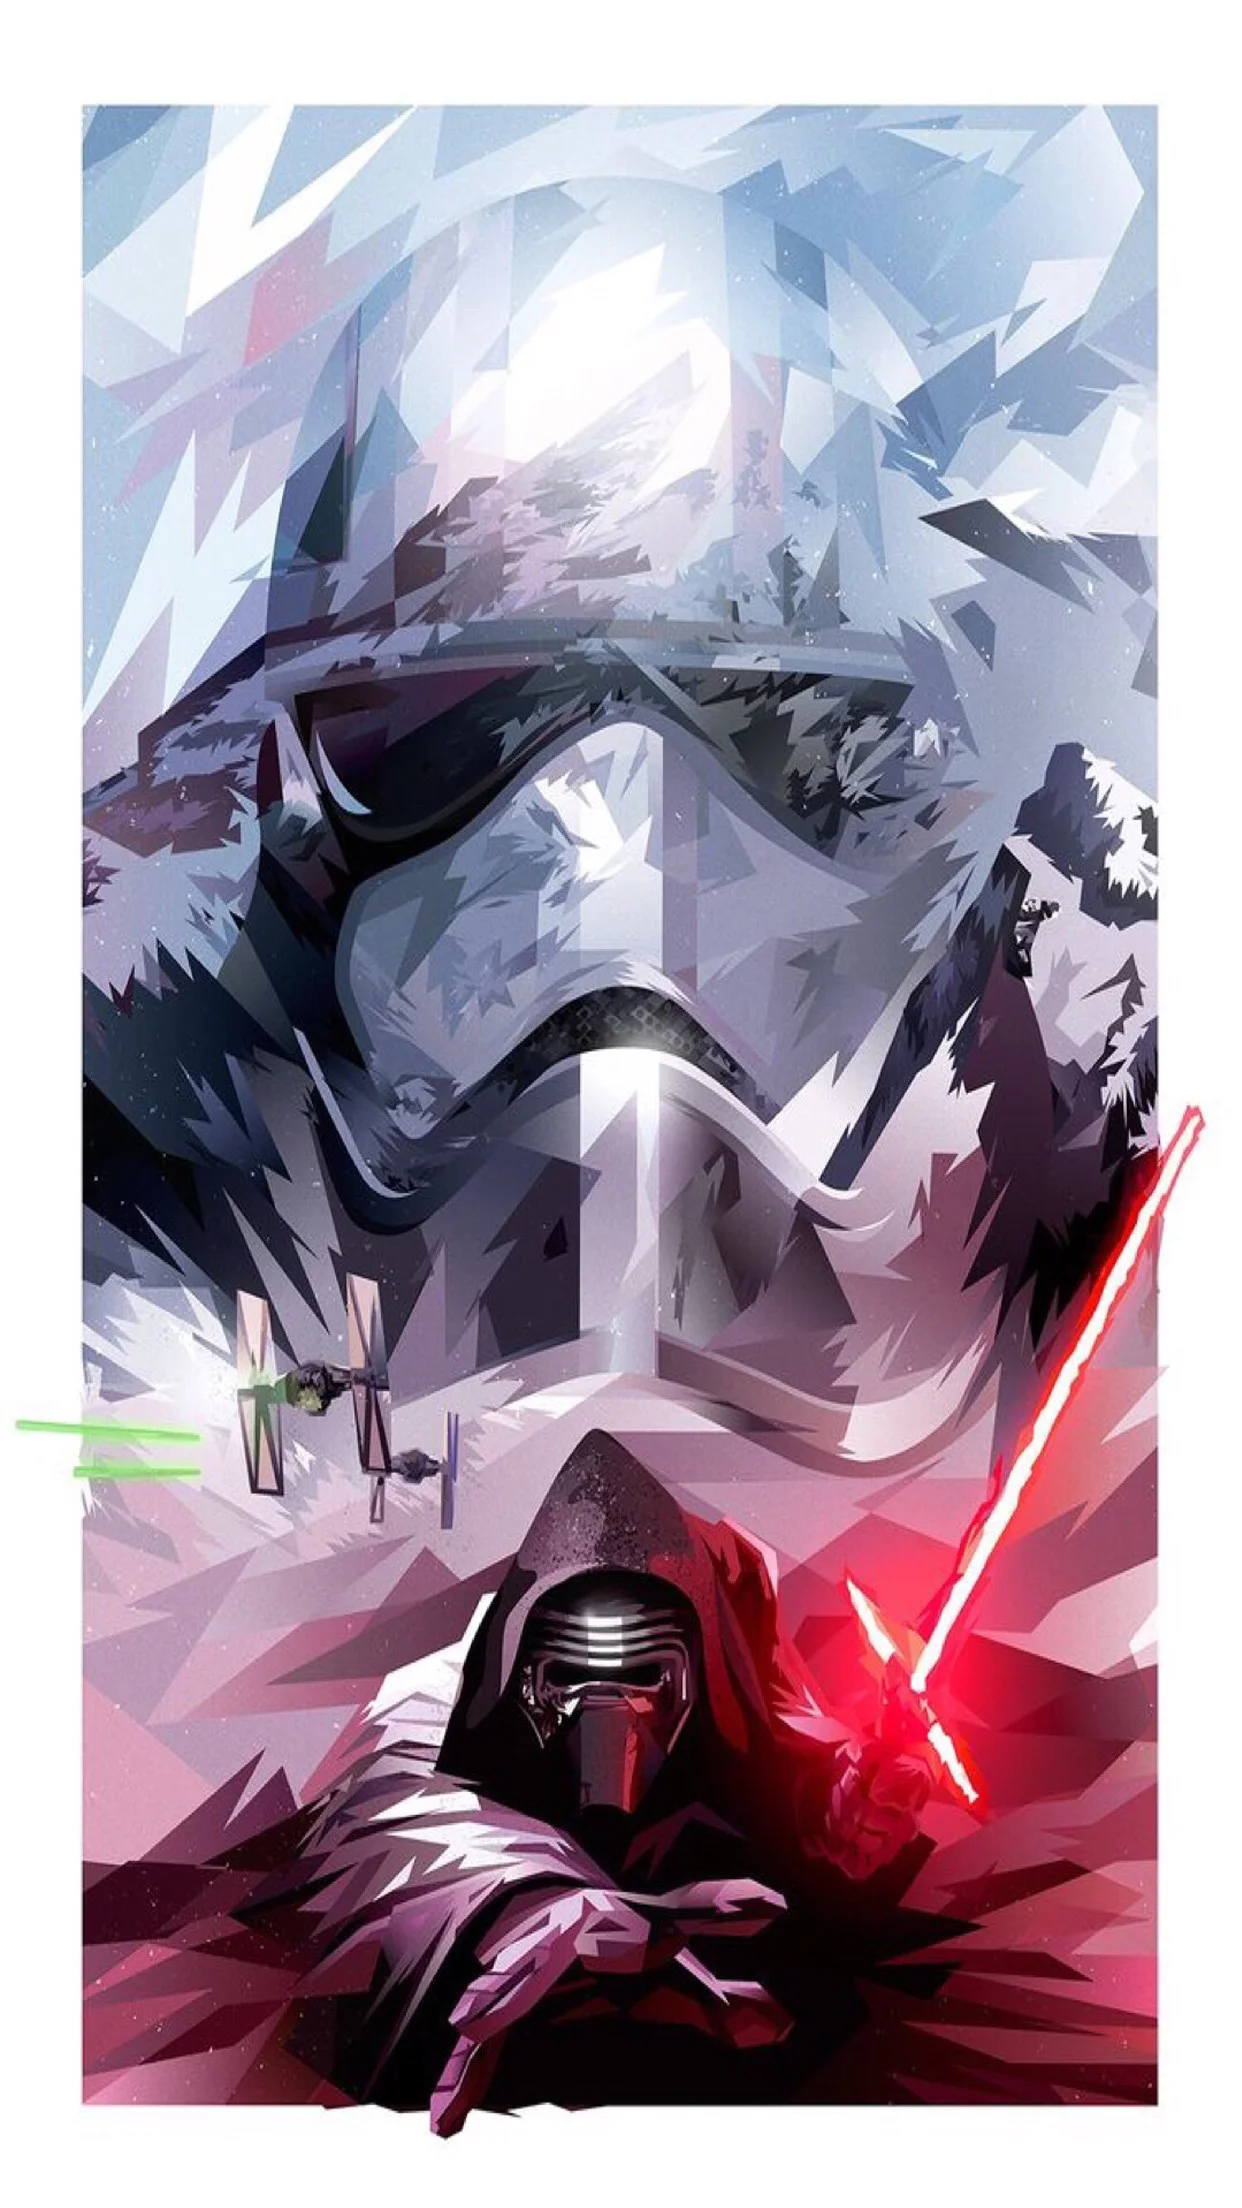 133+ Star Wars Live Wallpaper Android